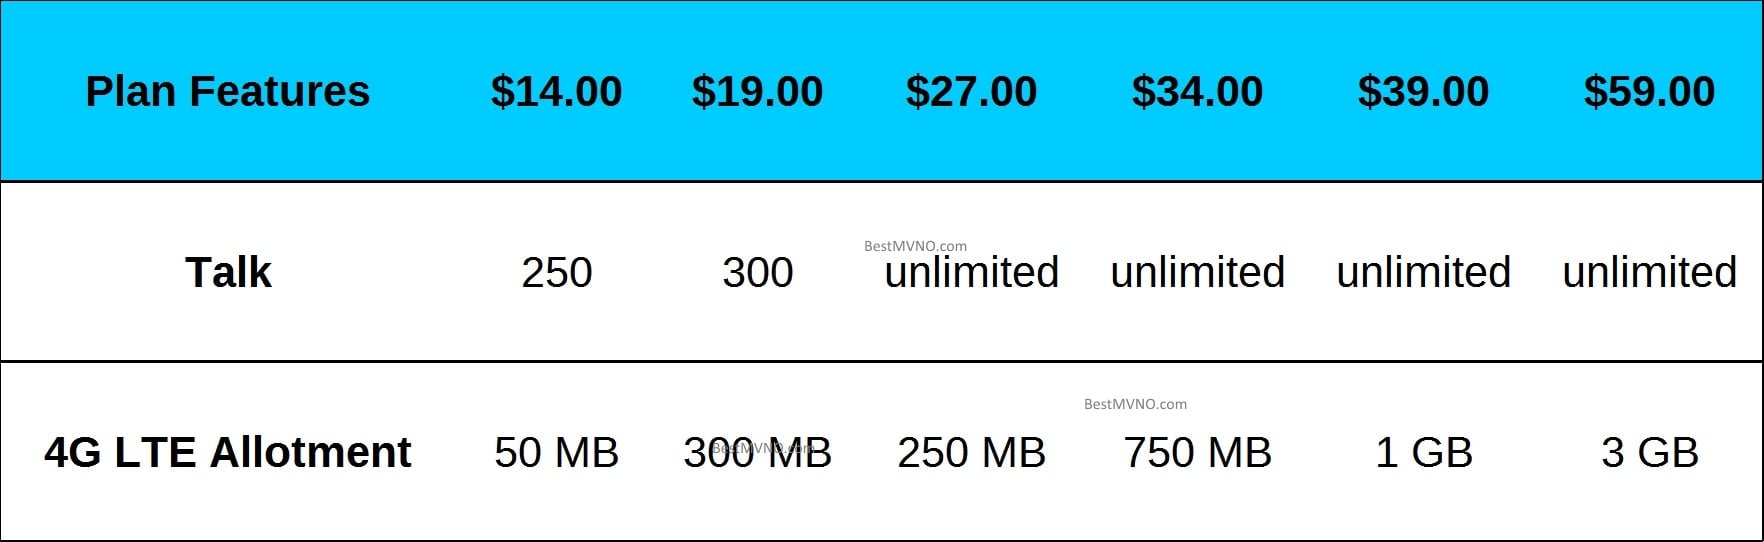 Pix Wireless Monthly Plan Rate Summary